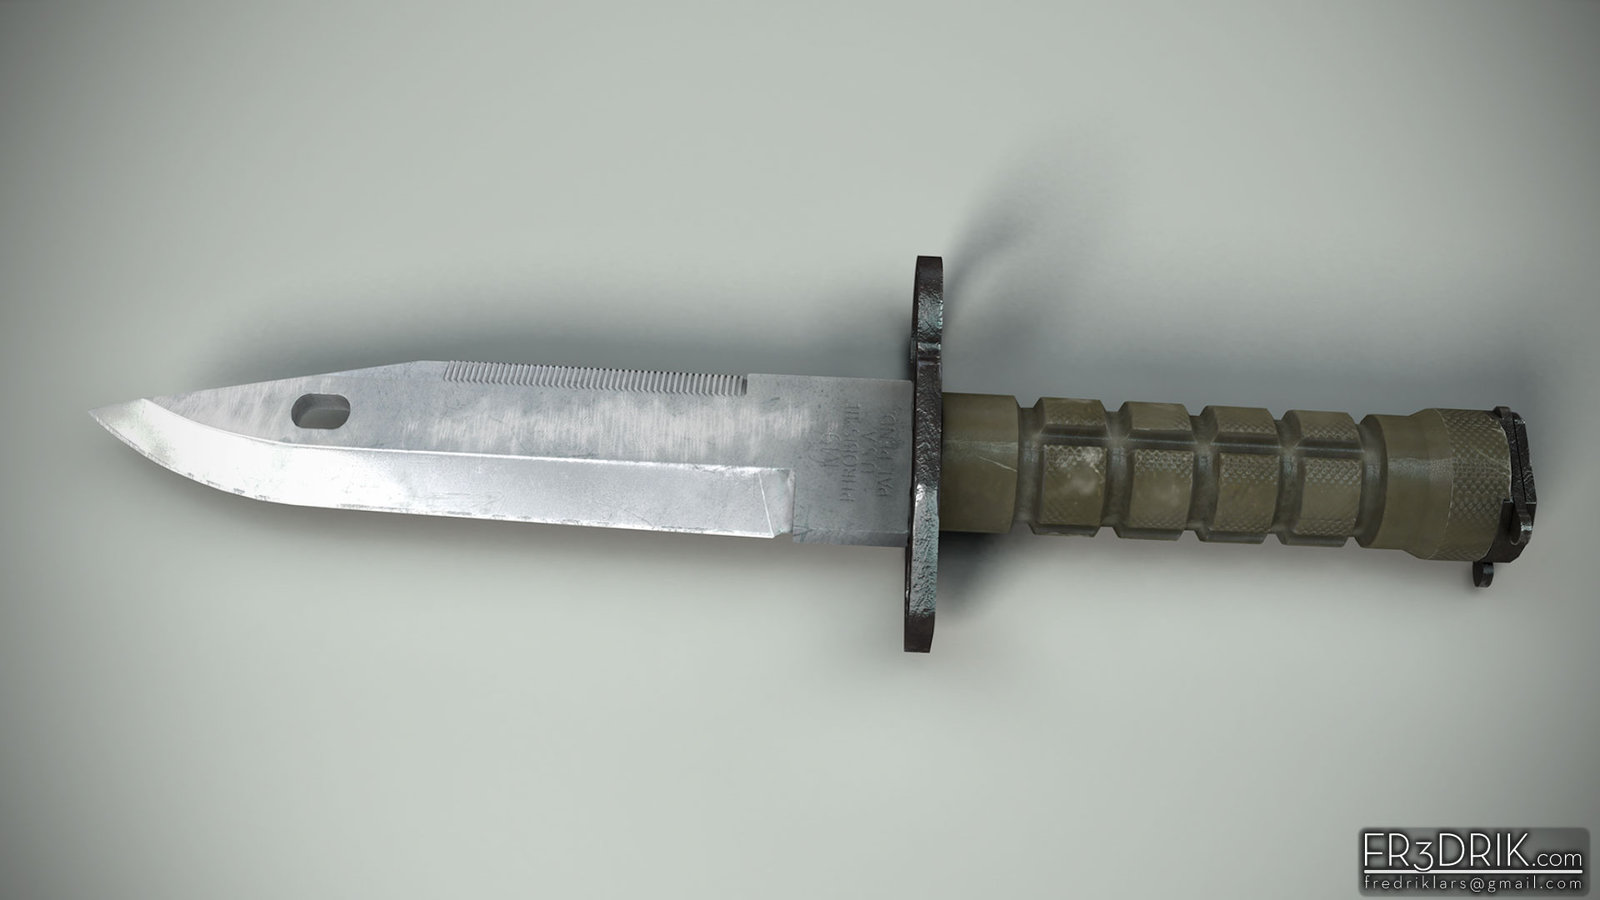 M9 combat knife. Mostly maya modelling with just a small detail pass in zbrush.